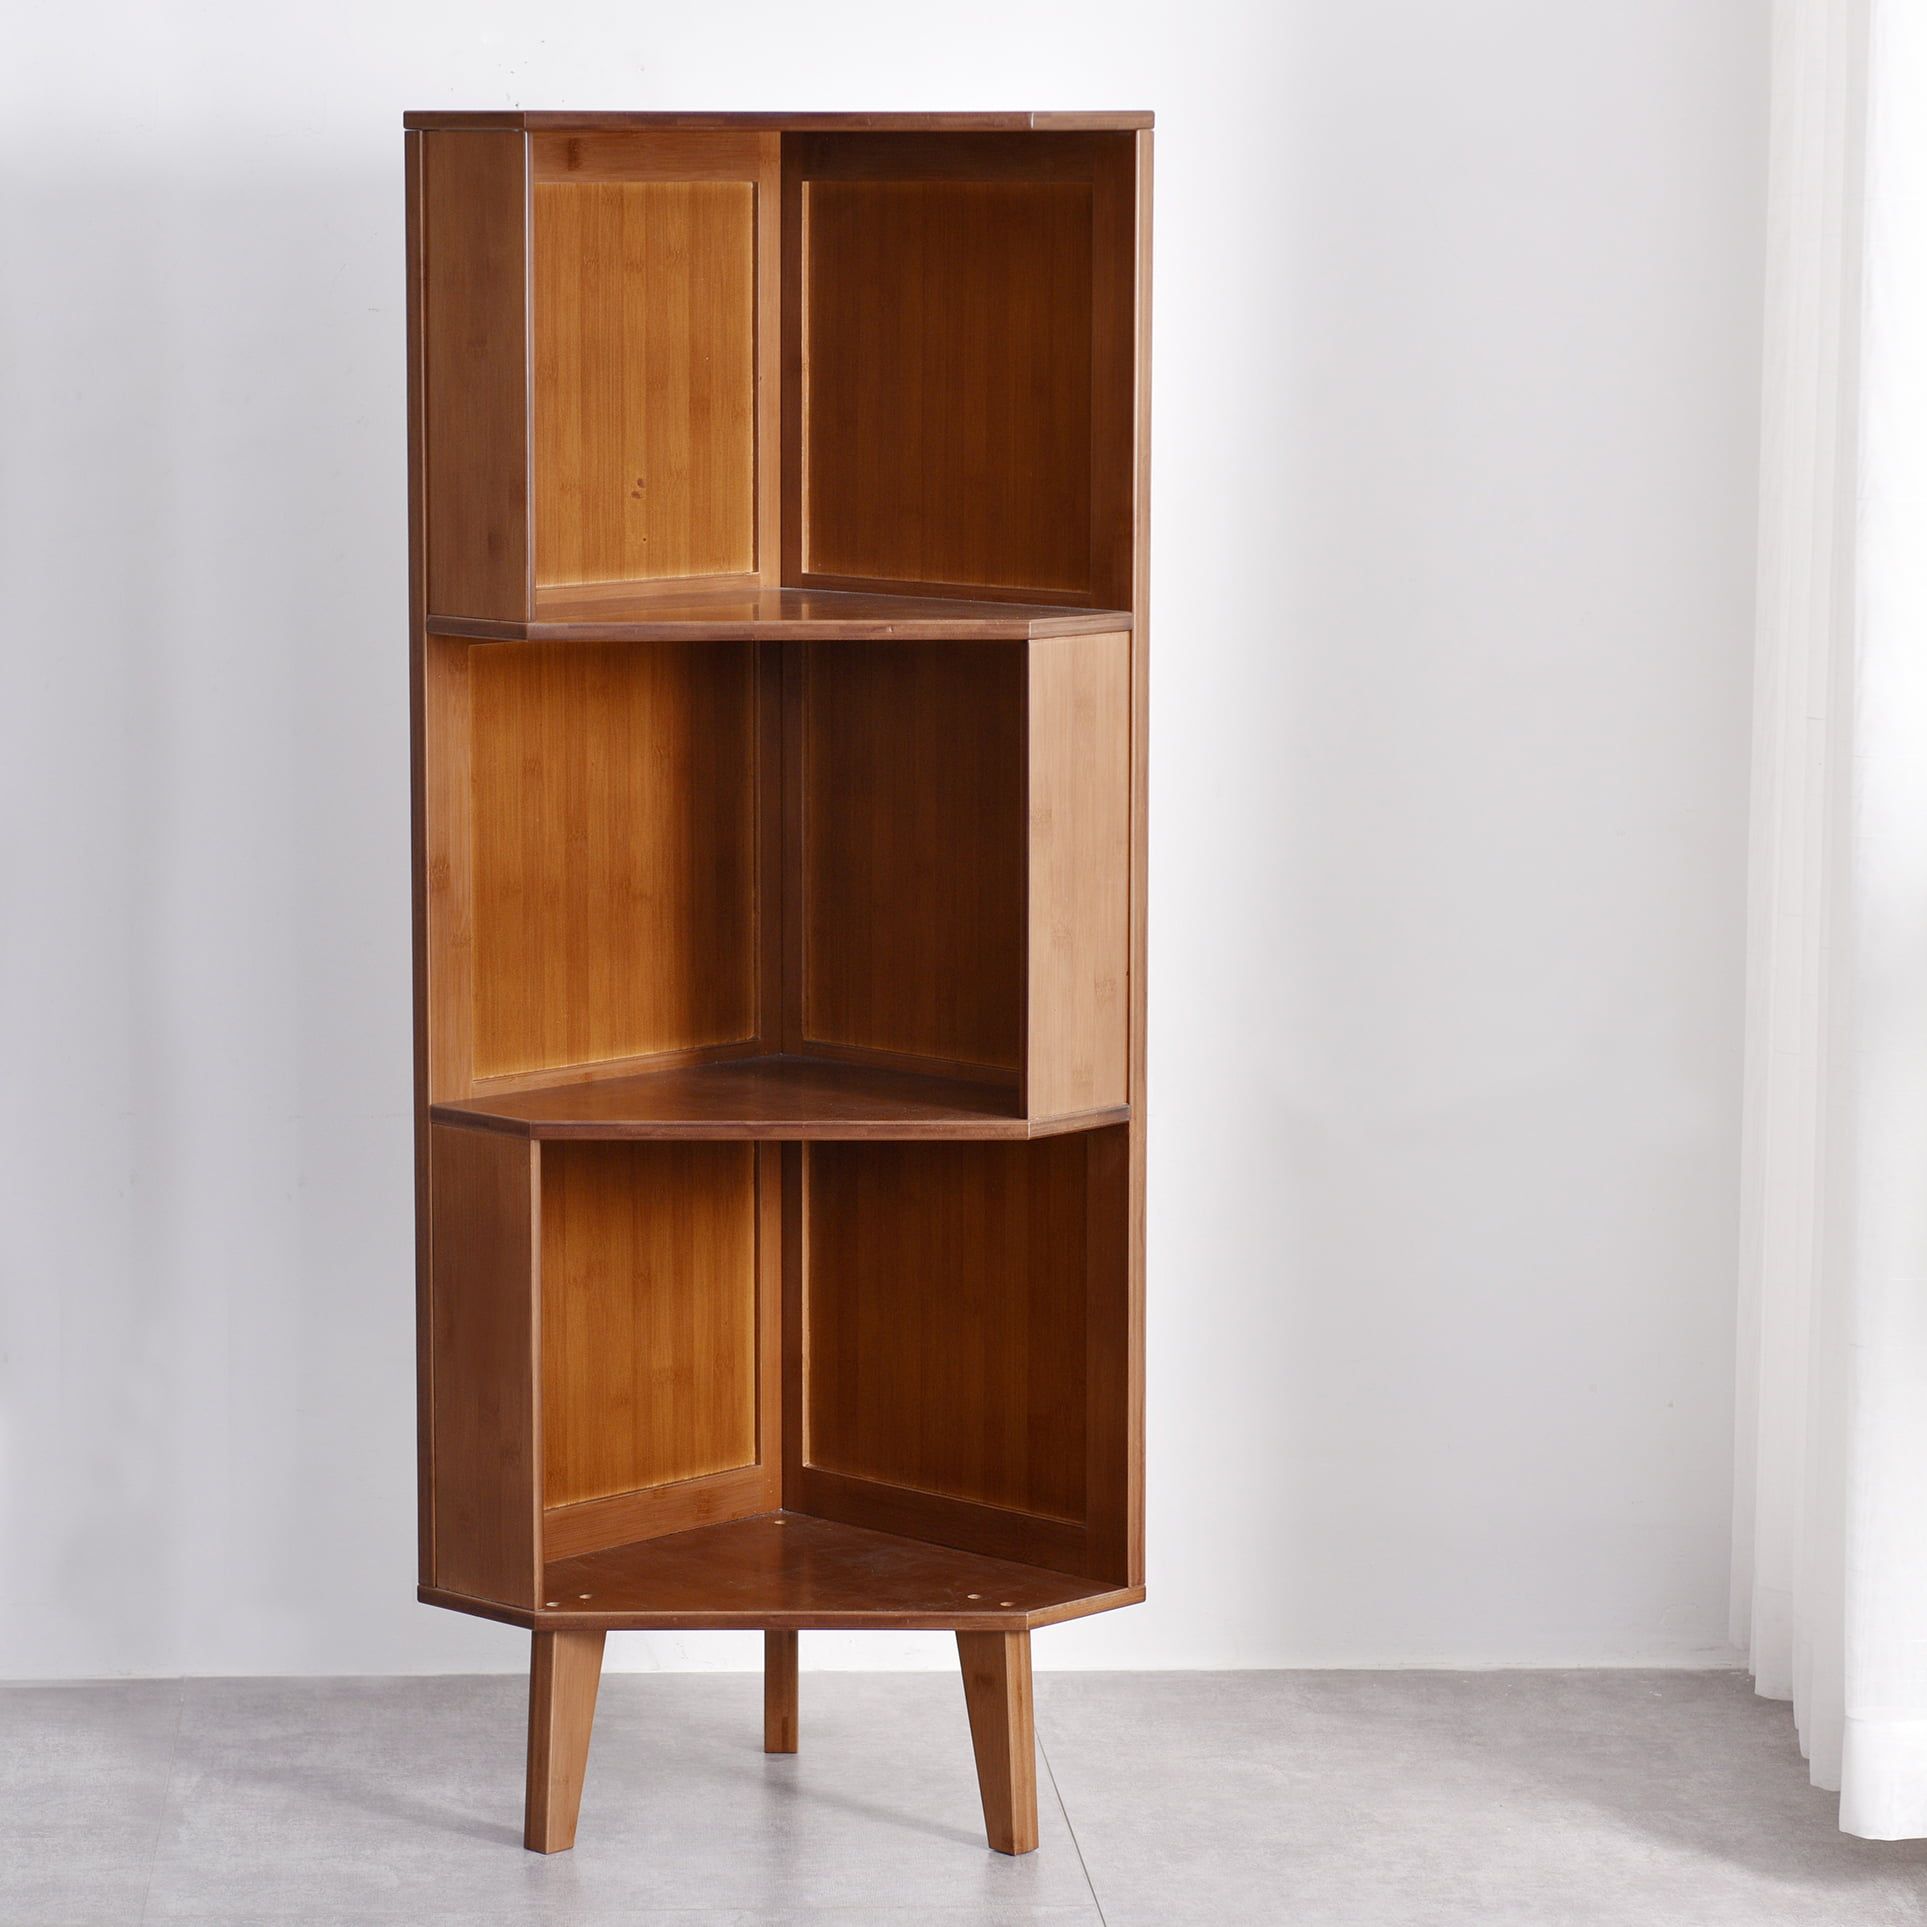 Tall bookcase in your house